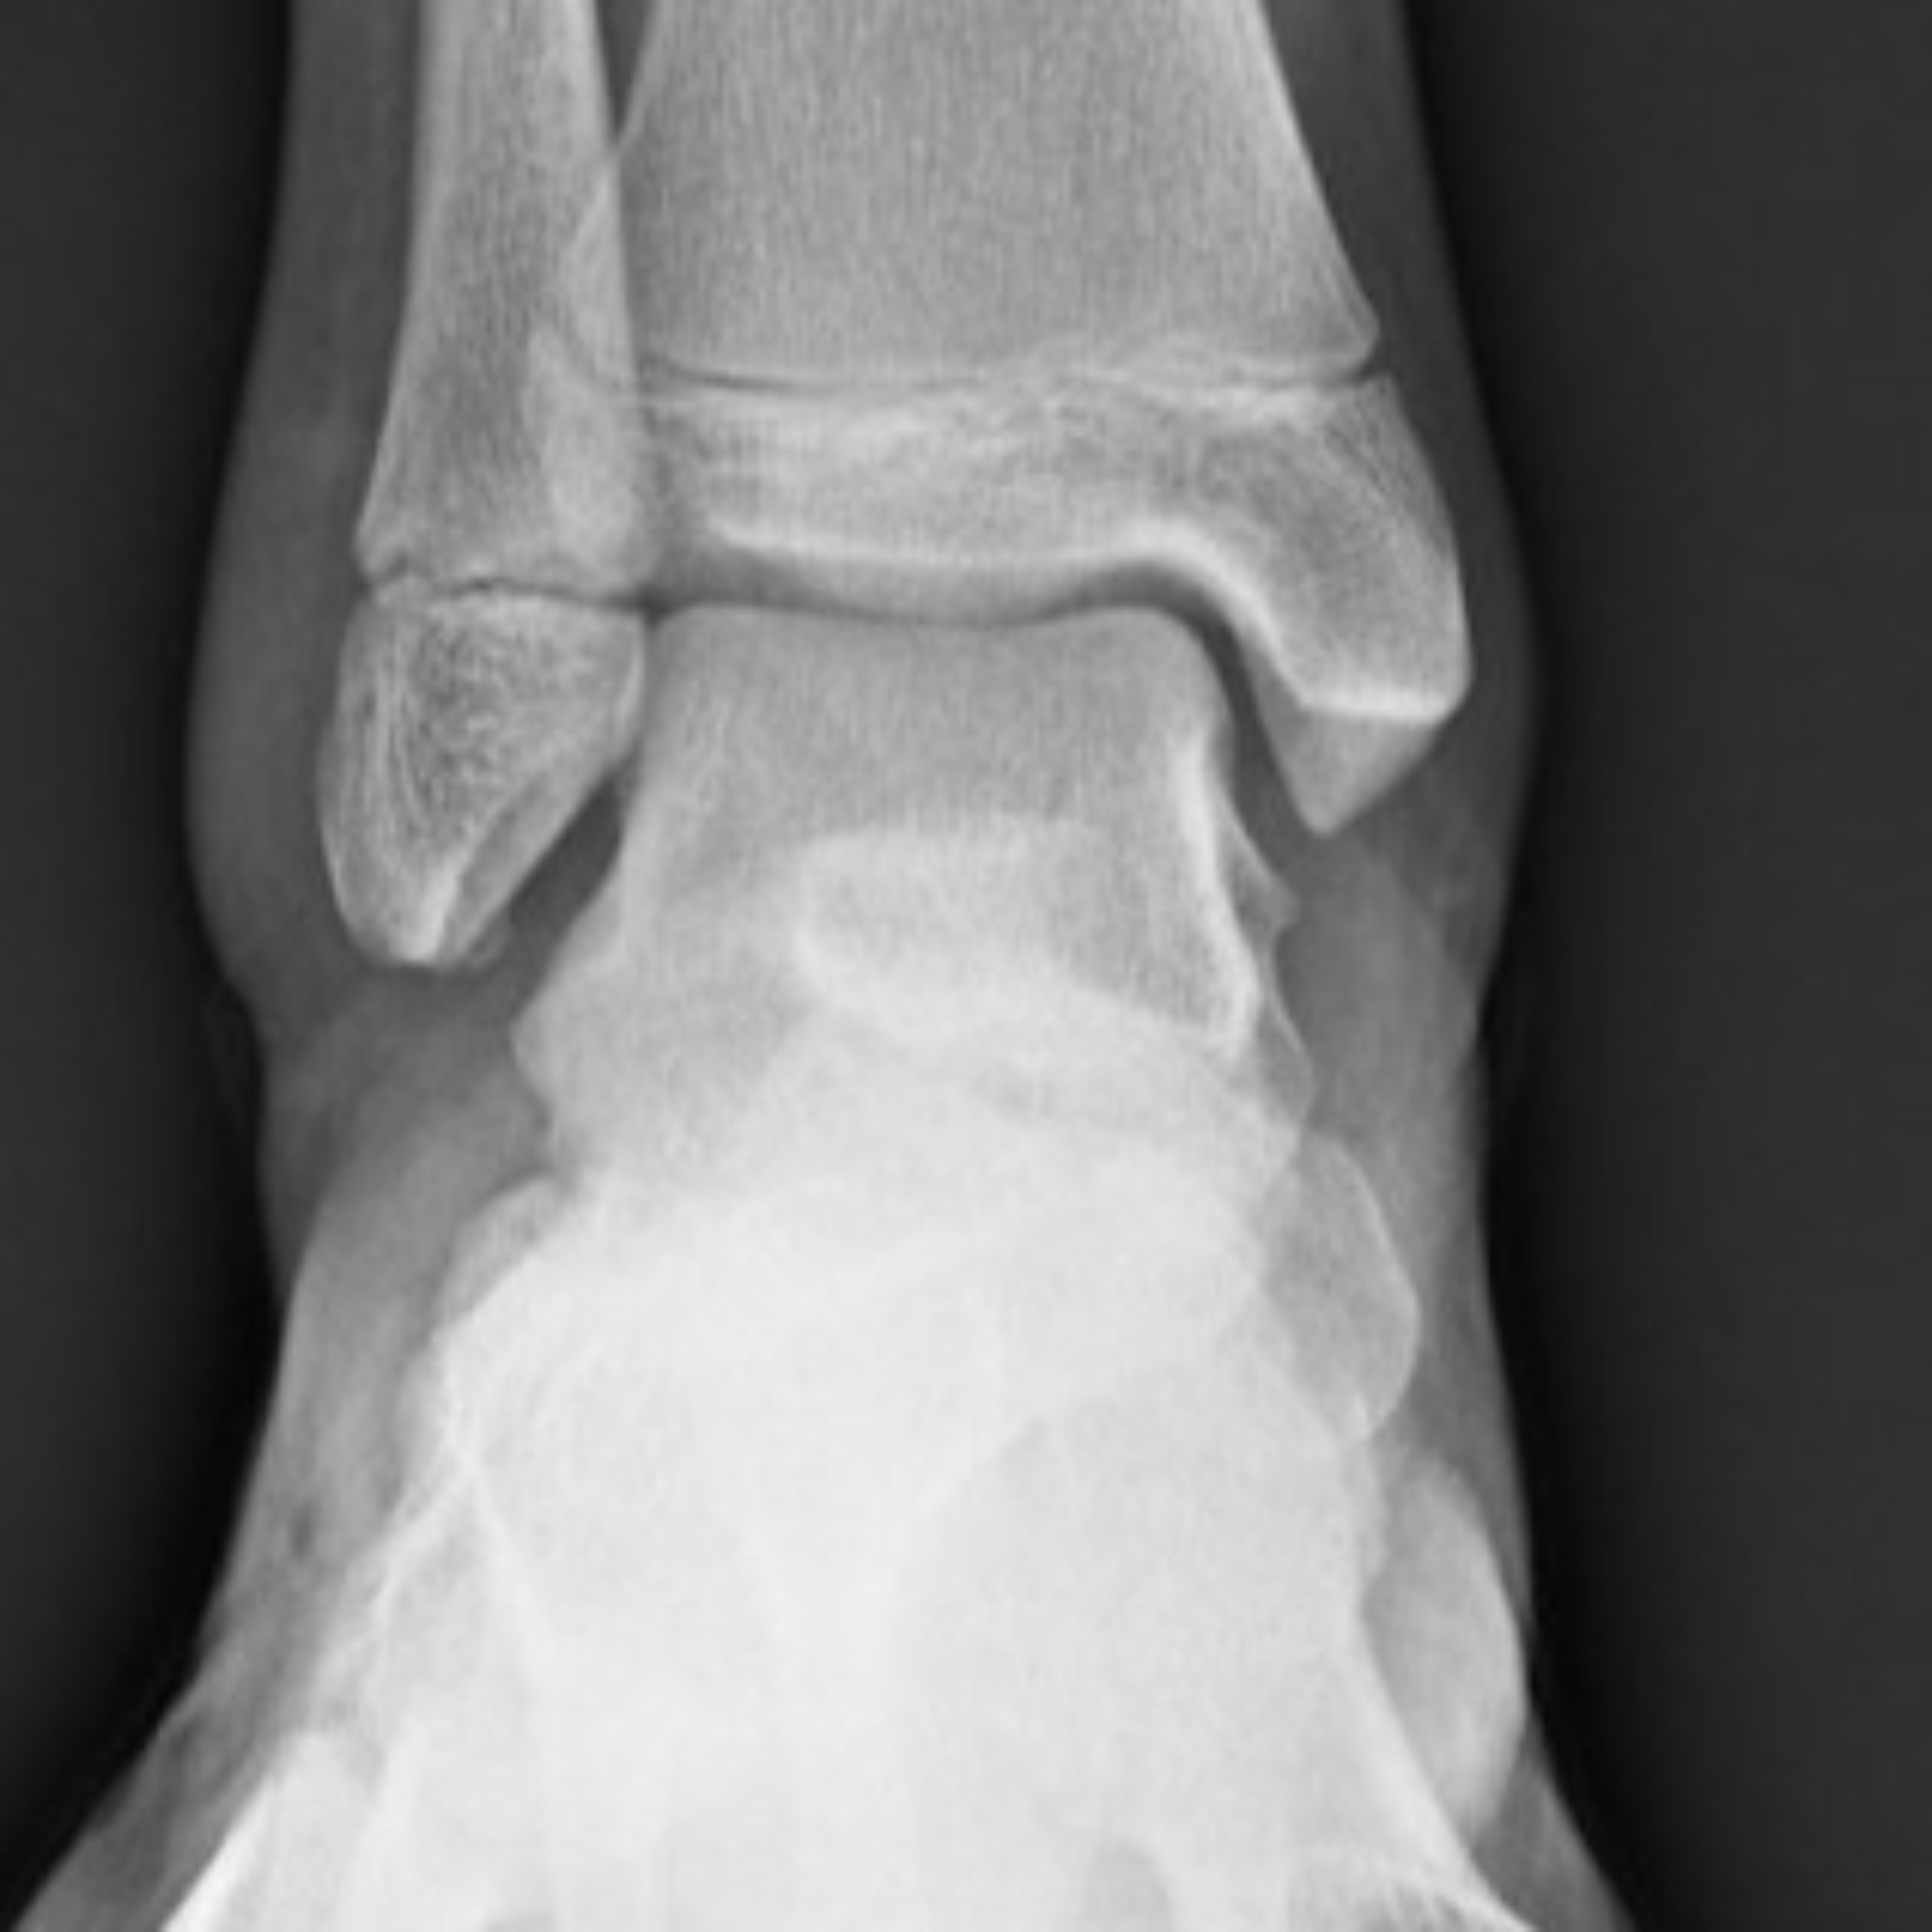 an xray of an ankle